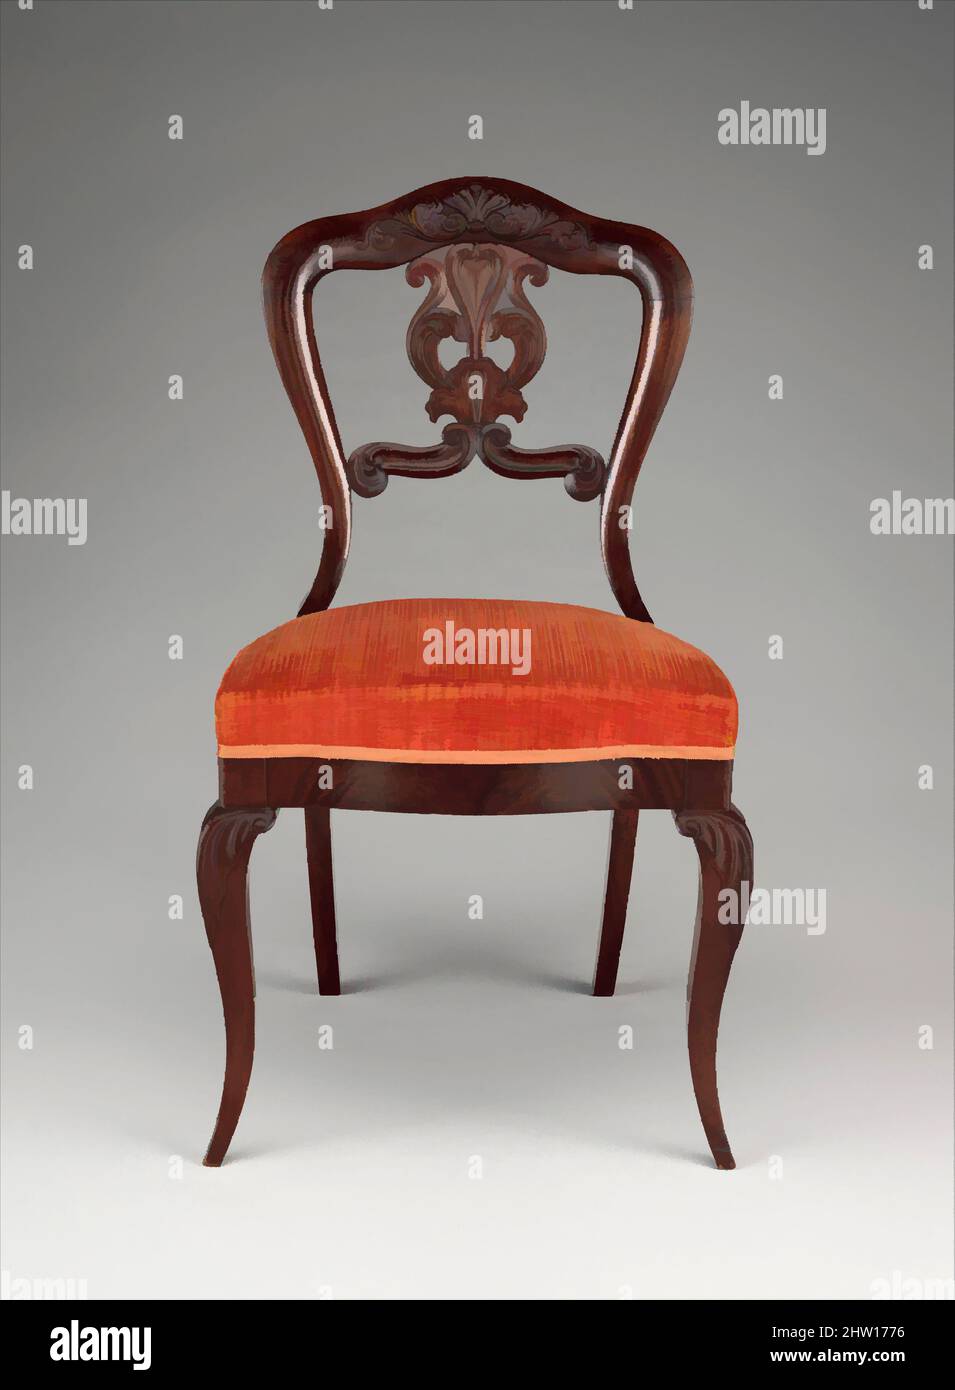 Art inspired by Side chair, ca. 1845, Made in New York, New York, United States, American, Walnut with upholstered seats, H. 33 1/2 in. (85.1 cm), Furniture, Classic works modernized by Artotop with a splash of modernity. Shapes, color and value, eye-catching visual impact on art. Emotions through freedom of artworks in a contemporary way. A timeless message pursuing a wildly creative new direction. Artists turning to the digital medium and creating the Artotop NFT Stock Photo